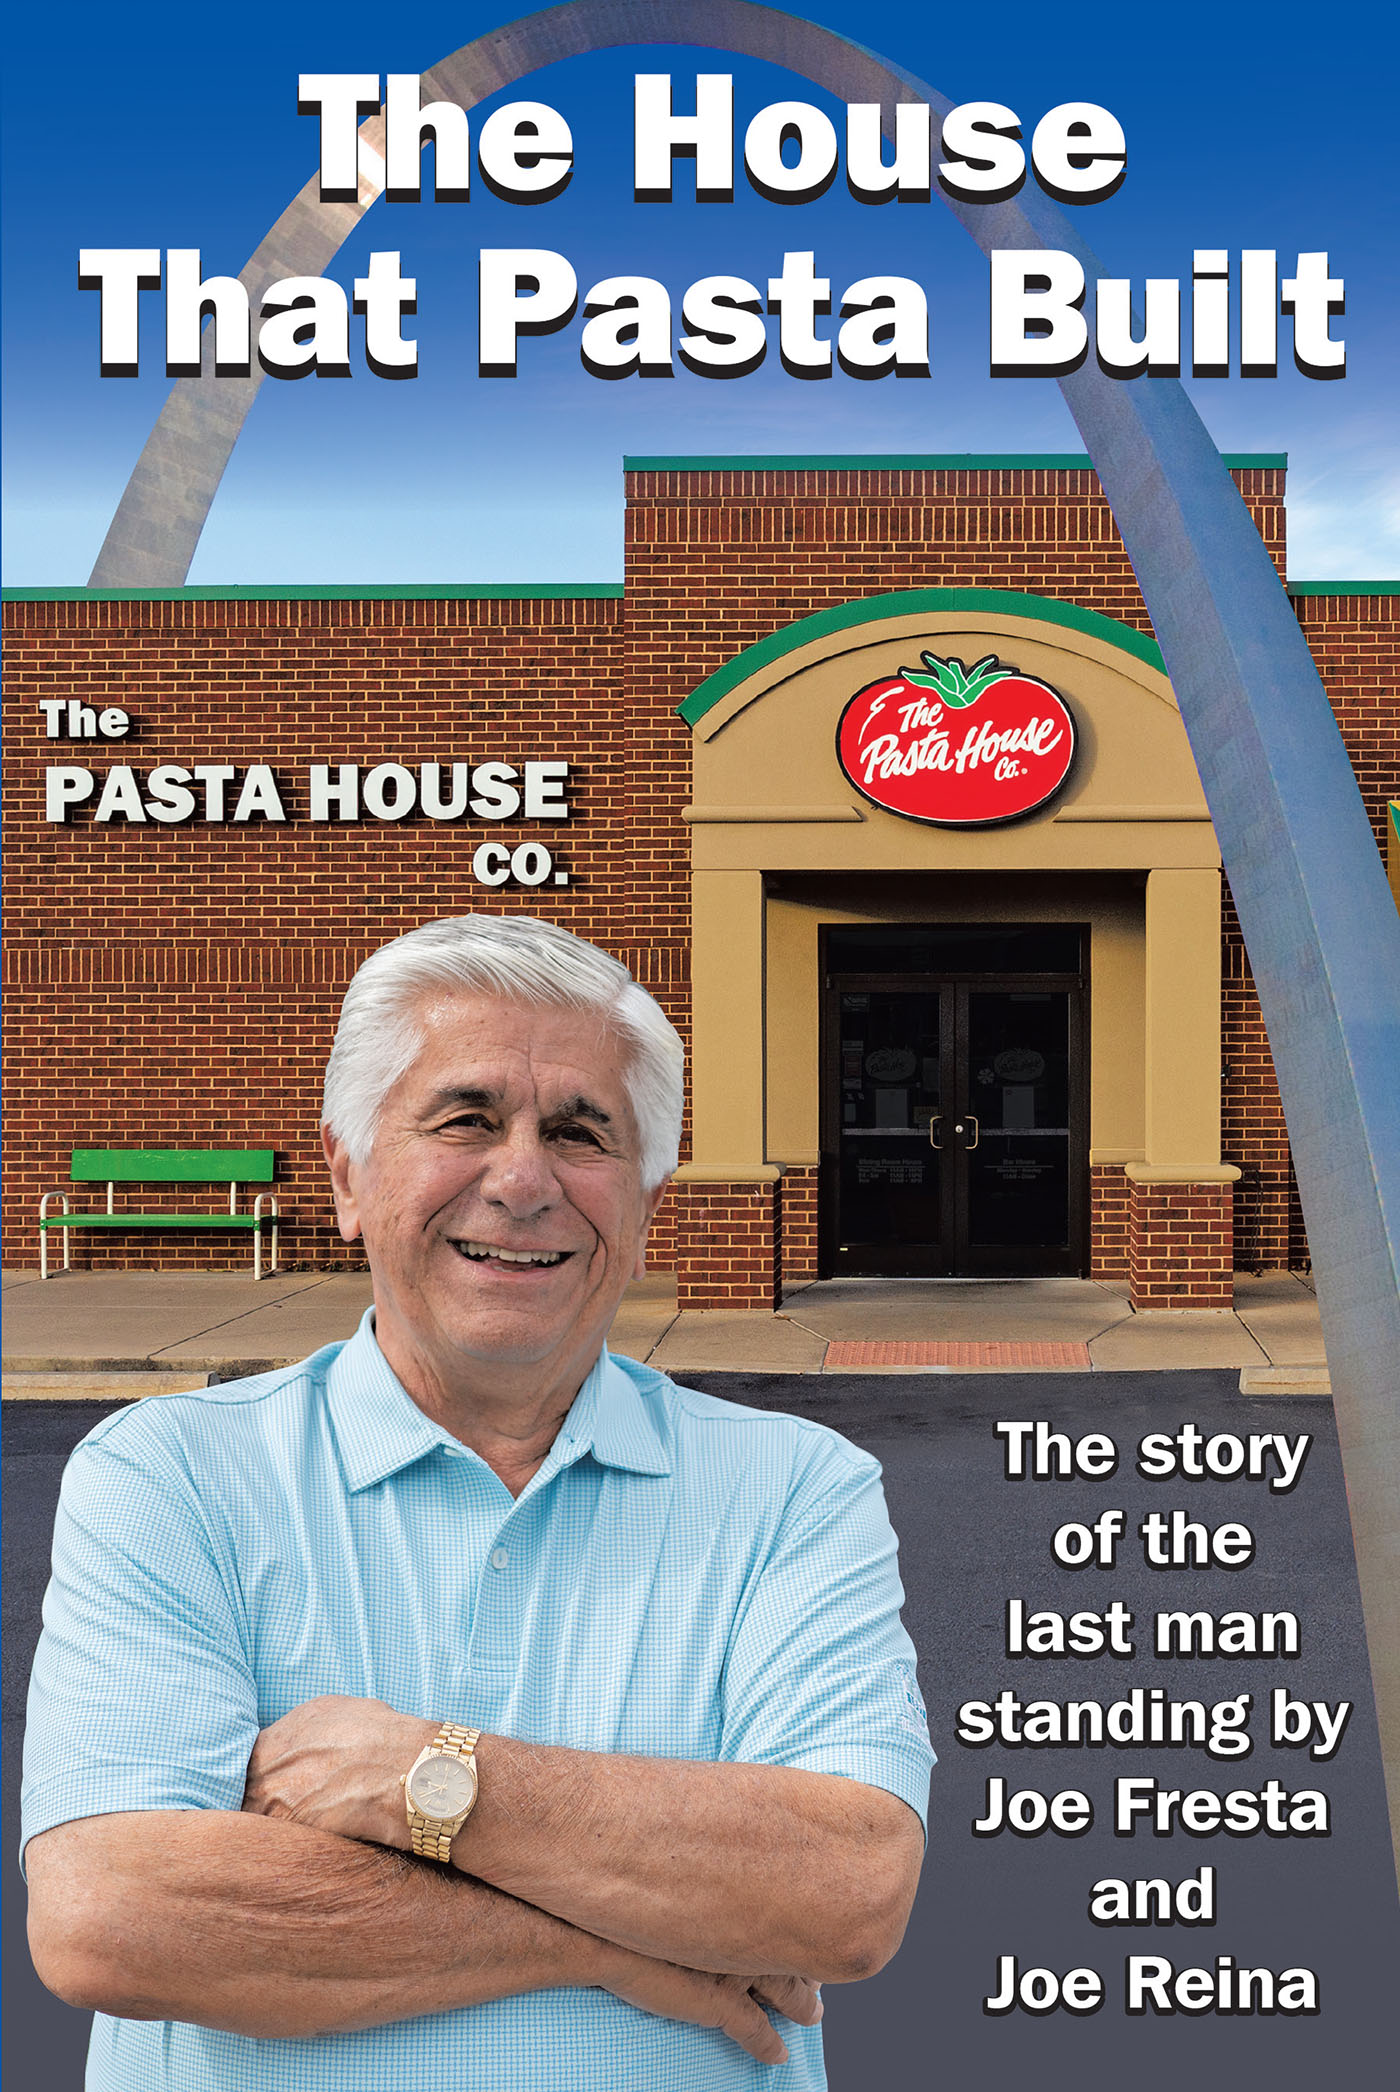 Authors Joe Fresta and Joe Reina’s New Book, "The House That Pasta Built," Follows the History of the Pasta House Company and How a Childhood Dream Became a Reality